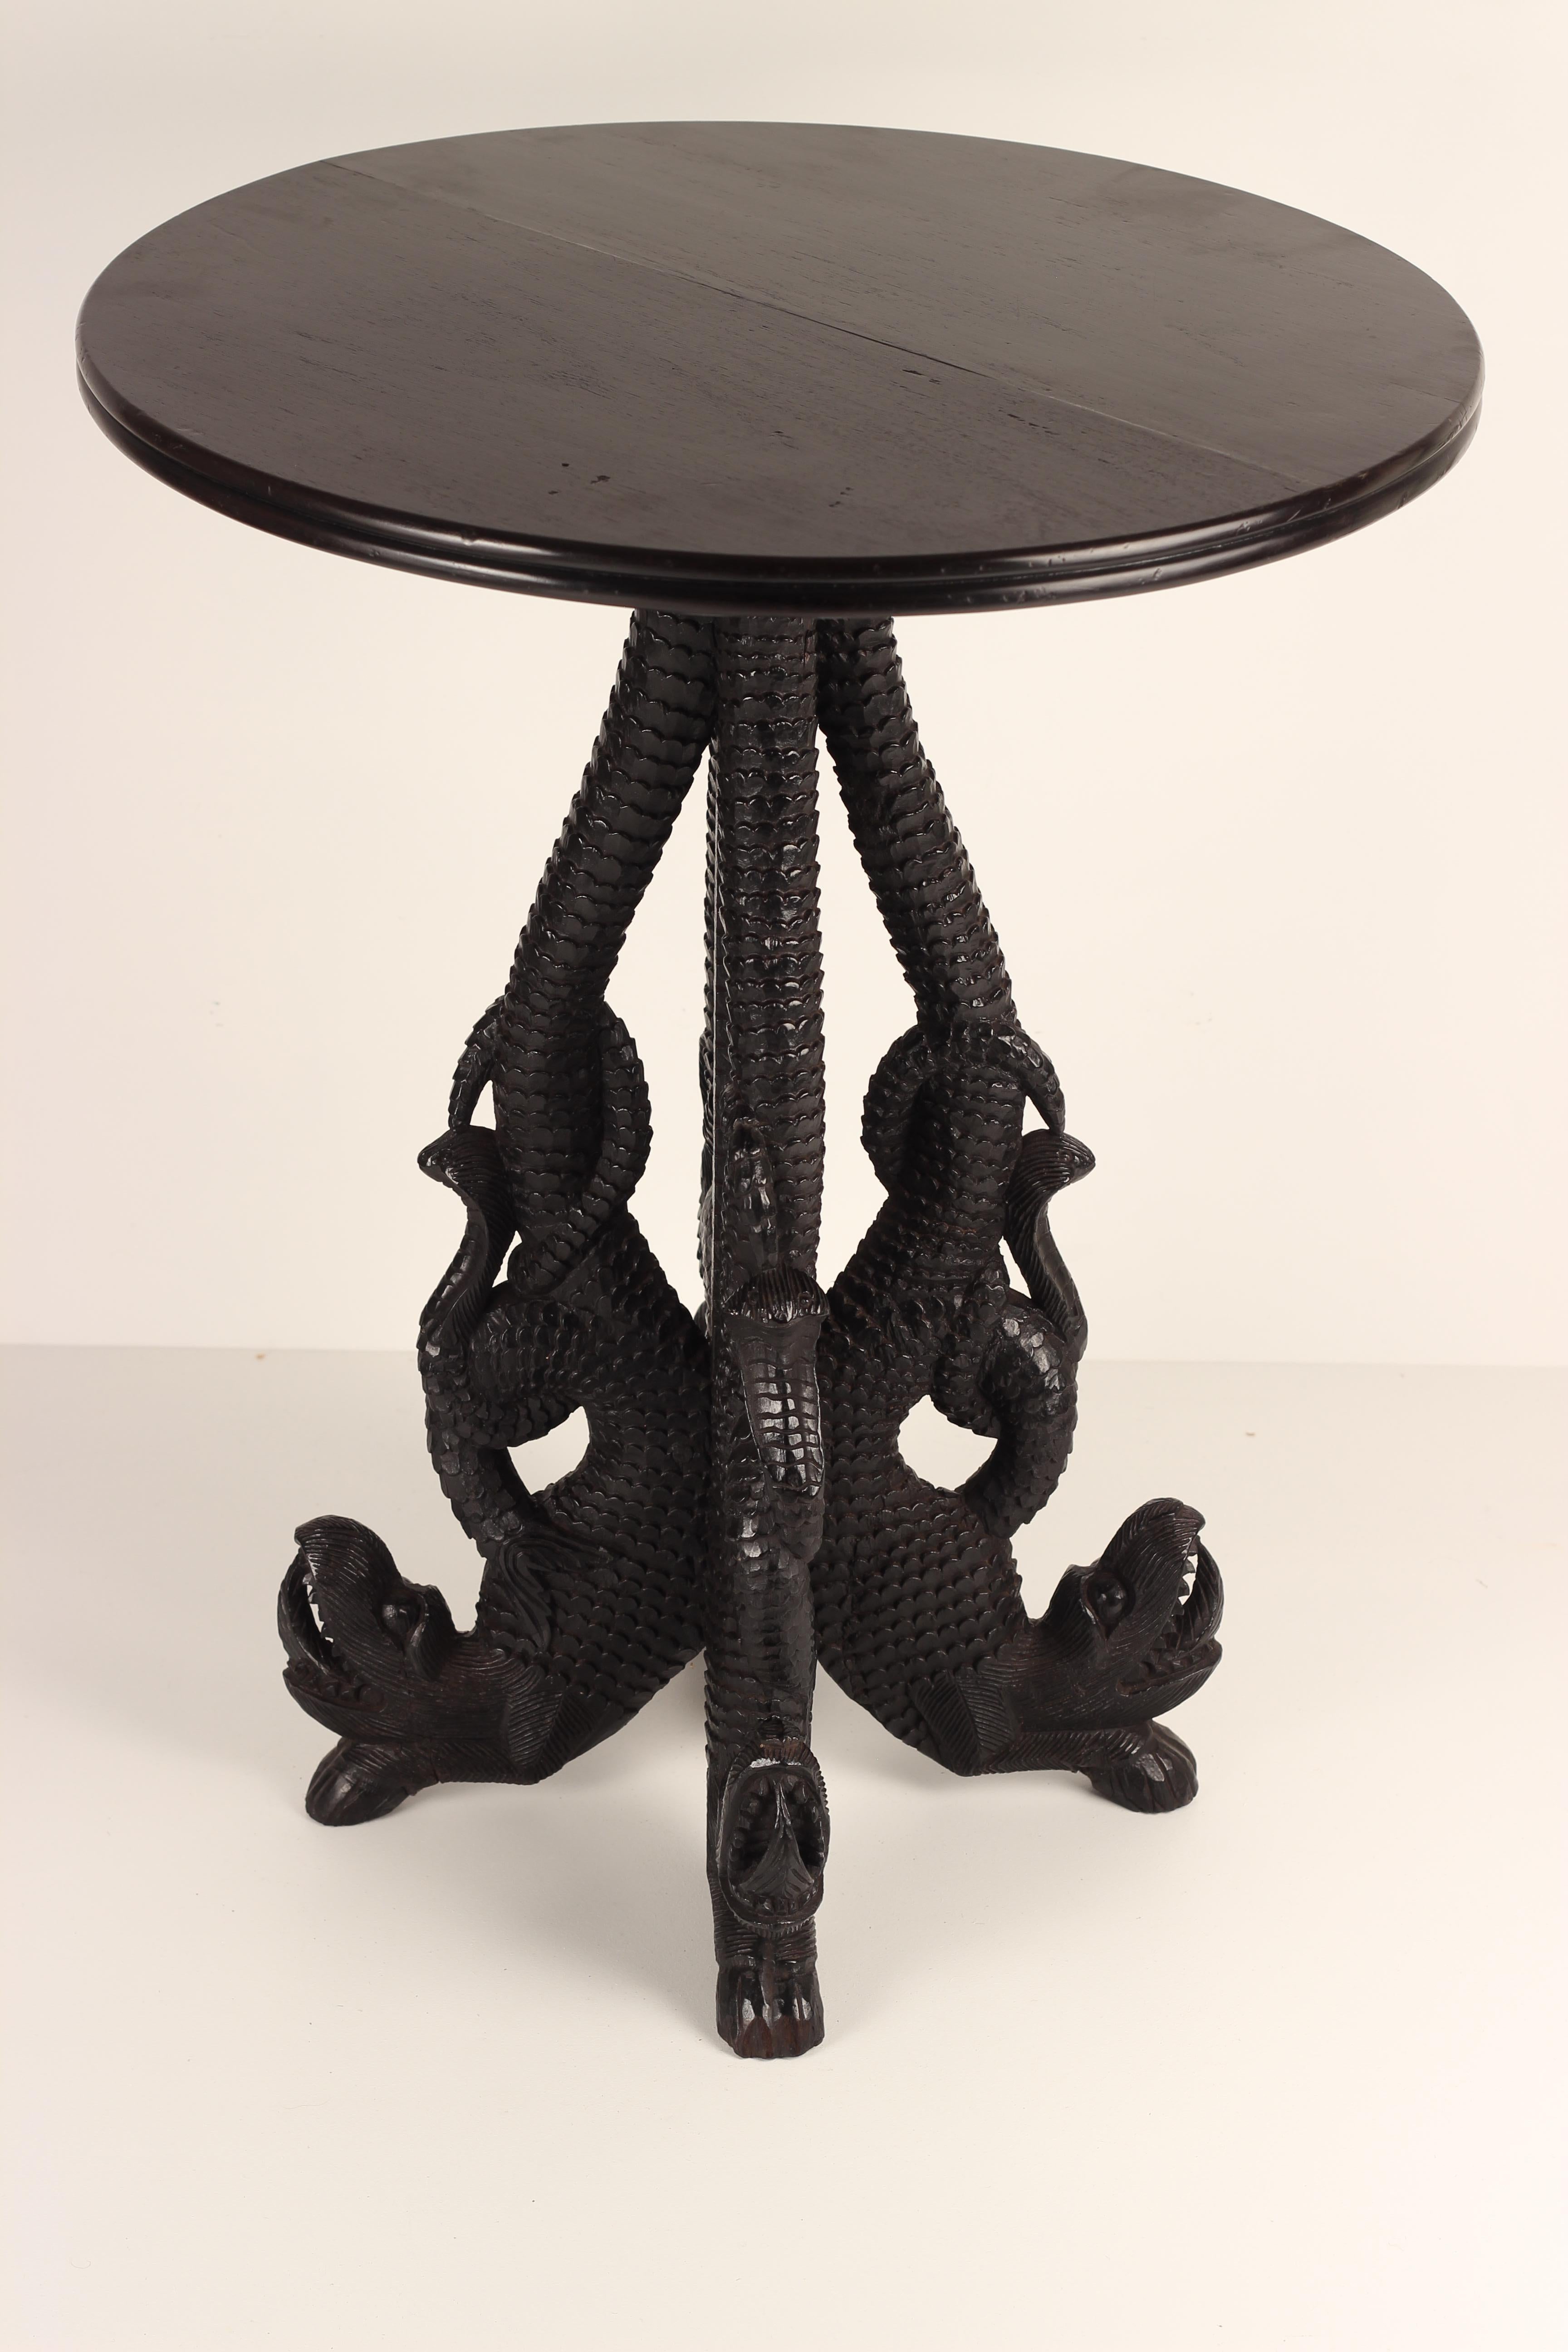 Extensively carved and detailed 19th Century Anglo-Indian Rosewood table. Four dragons form the stem and the feet of the table. We believe the top to be a later edition and feel that it would benefit from a bespoke marble top as a replacement to the